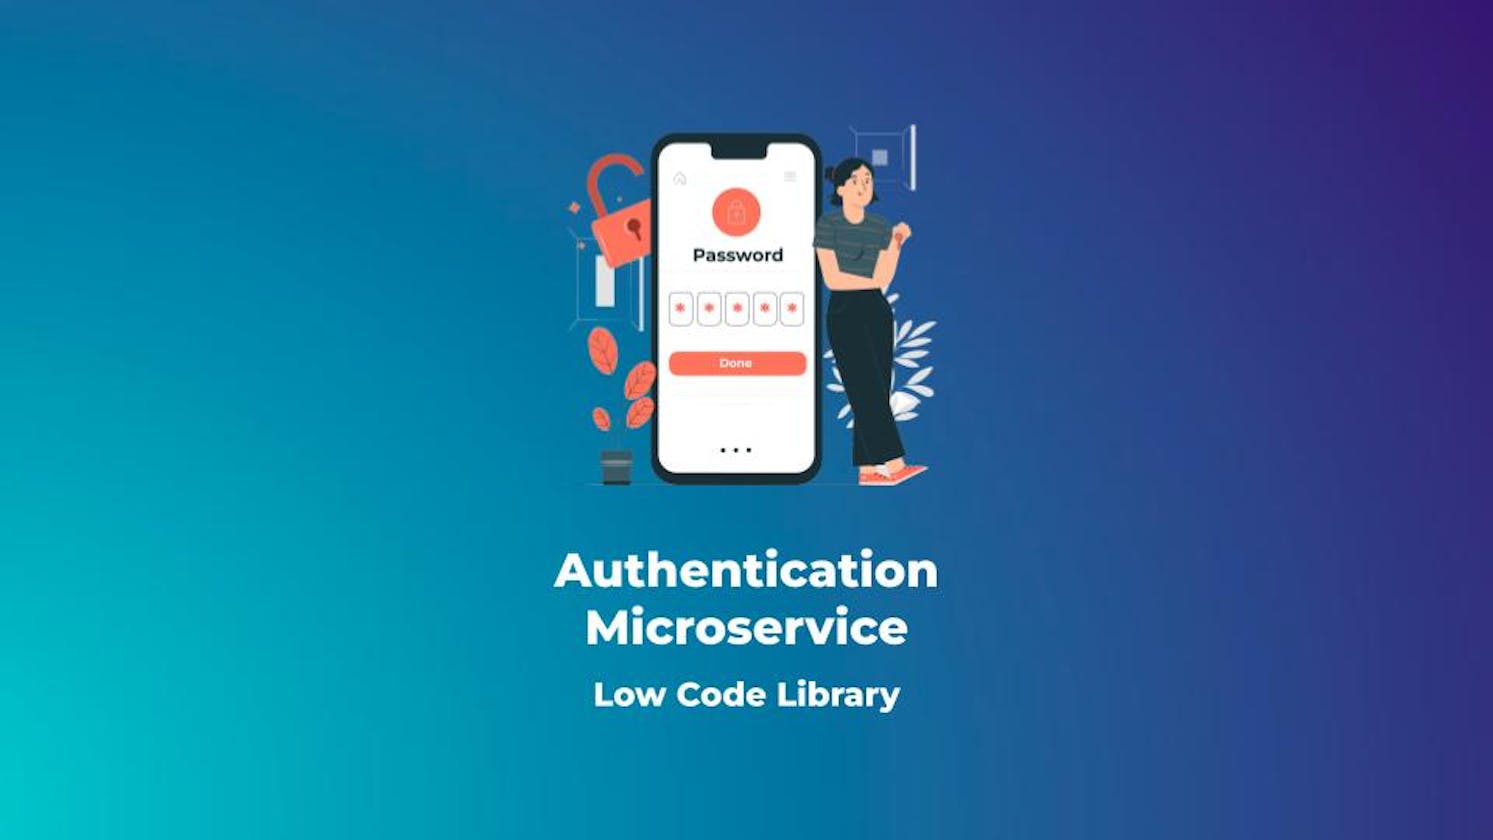 How To Add A Serverless Authentication Microservice To Your HTML, CSS & Javascript App